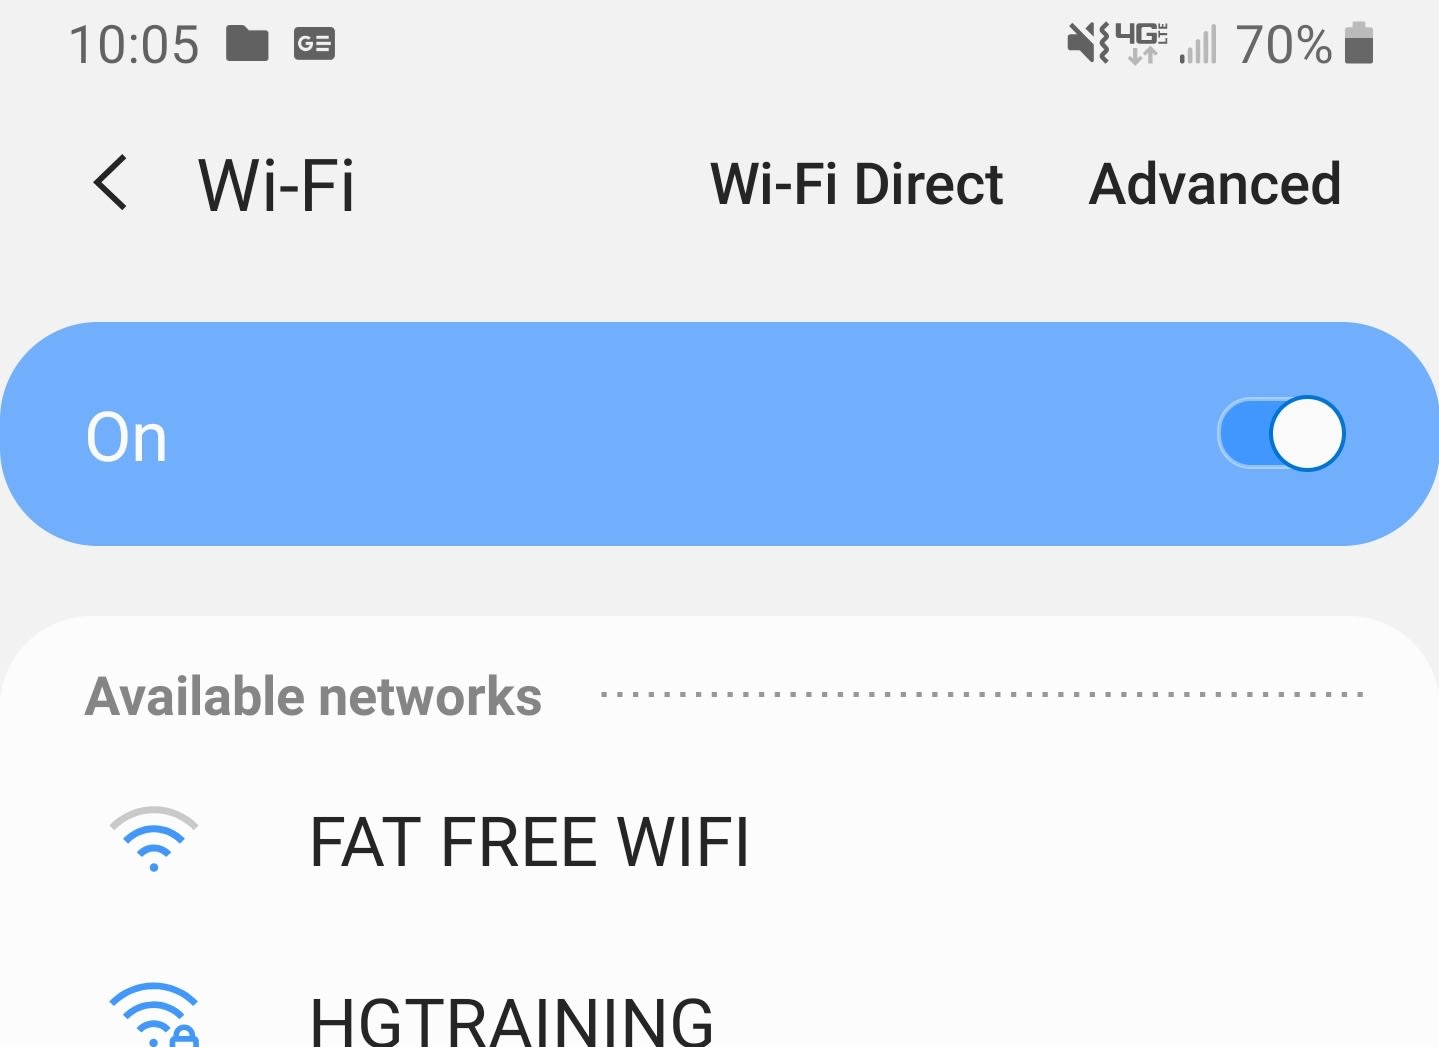 Fresno's airport code is FAT and this is their wifi name